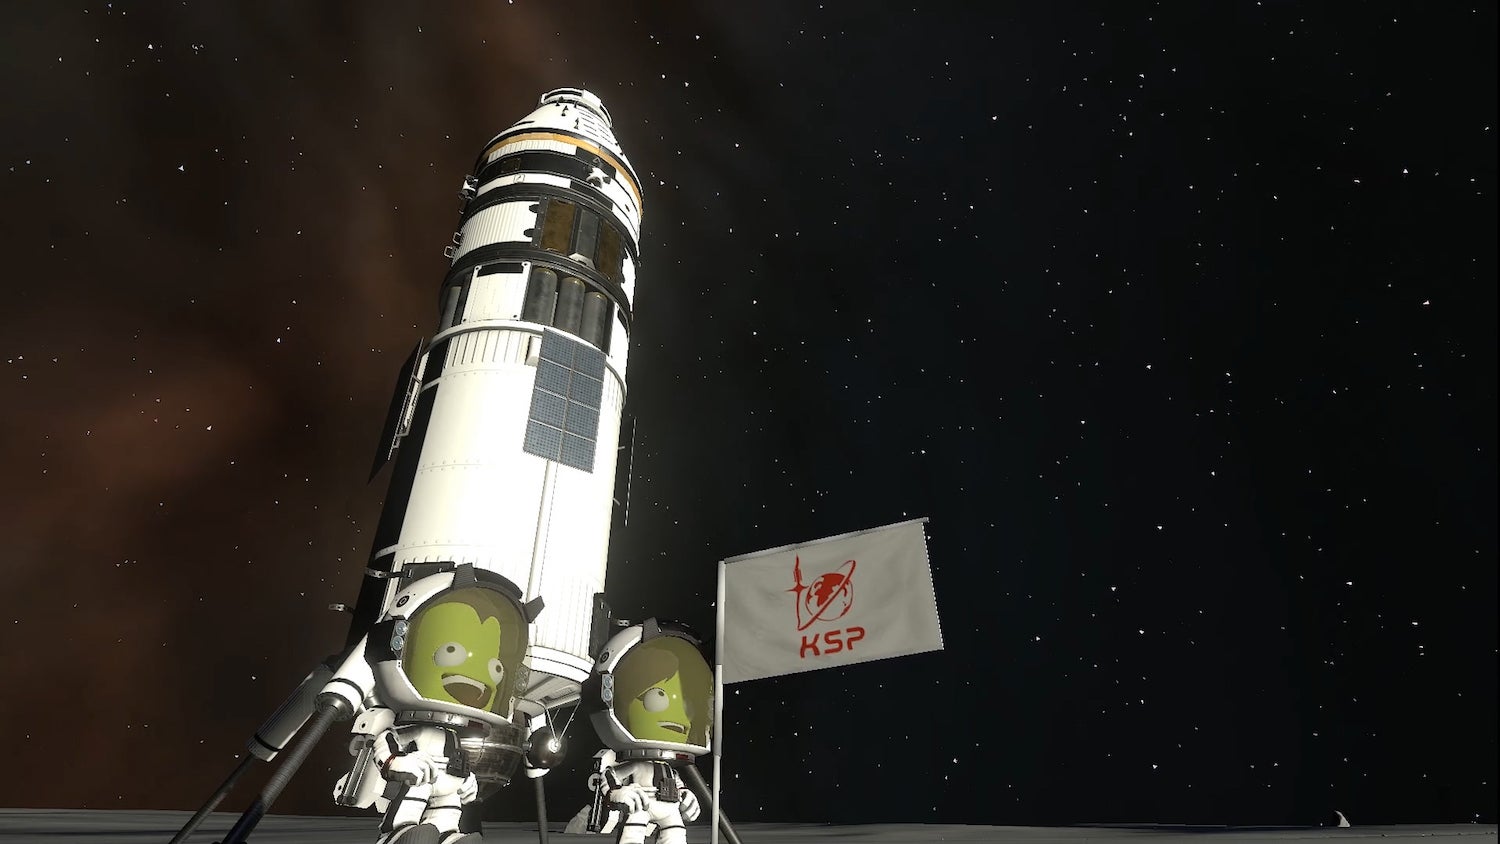 Kerbal Space Program 2 Will Have Real Science Underlying Its Wacky Spaceships